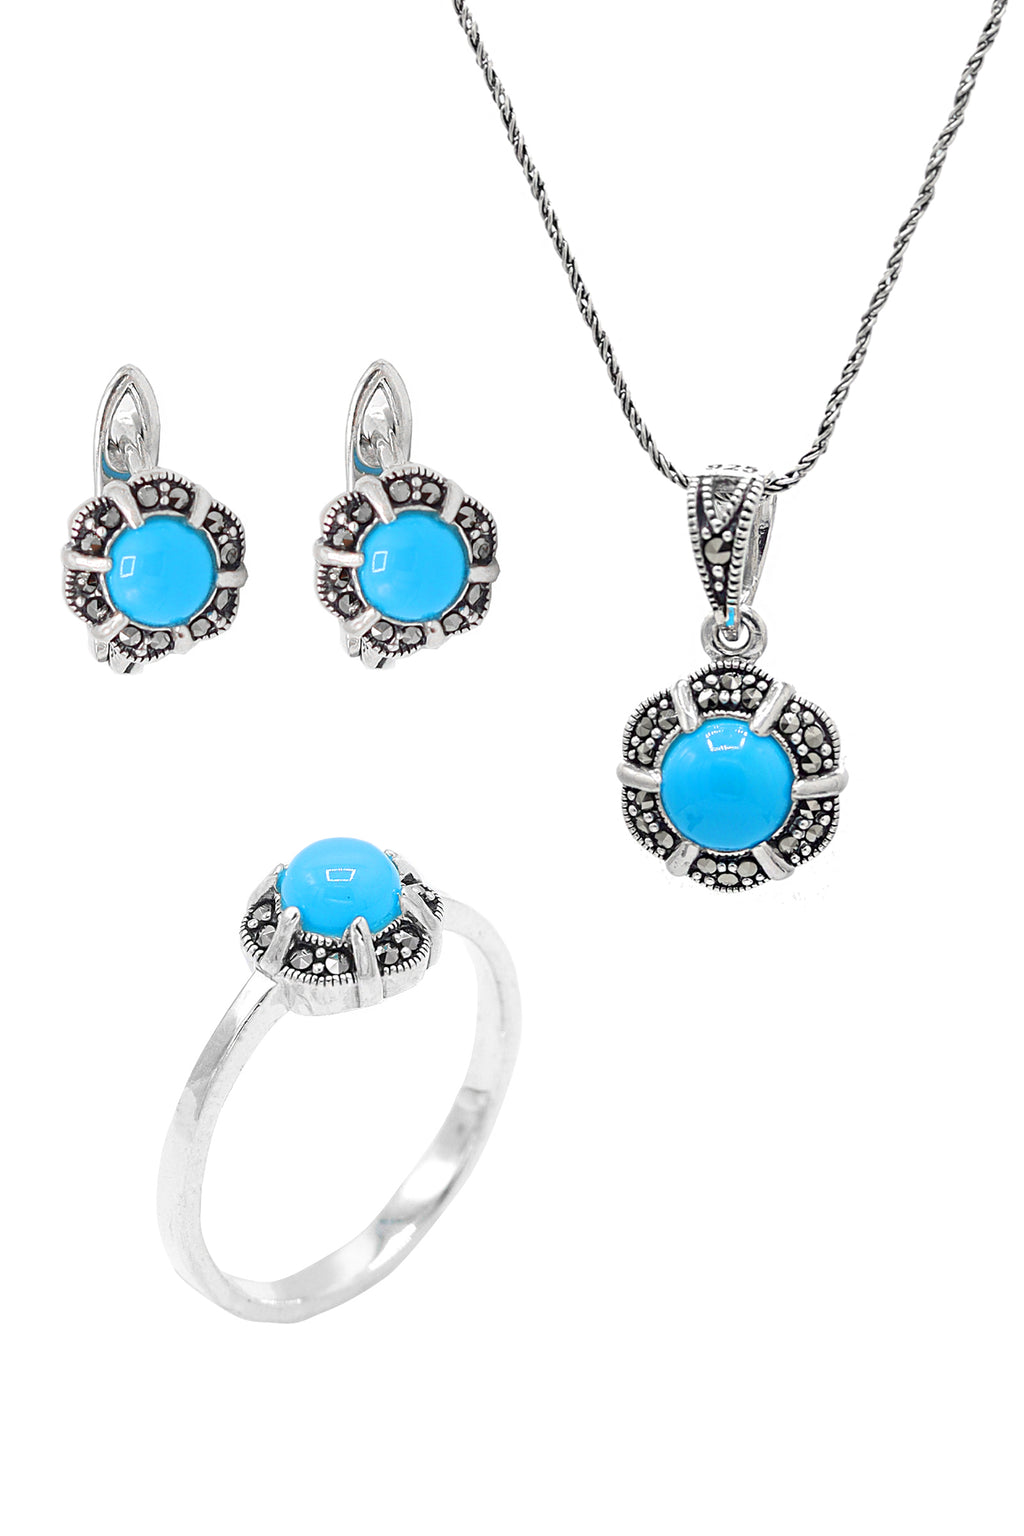 Floral Model Silver Triple Jewelry Set With Turquoise (NG201021921)